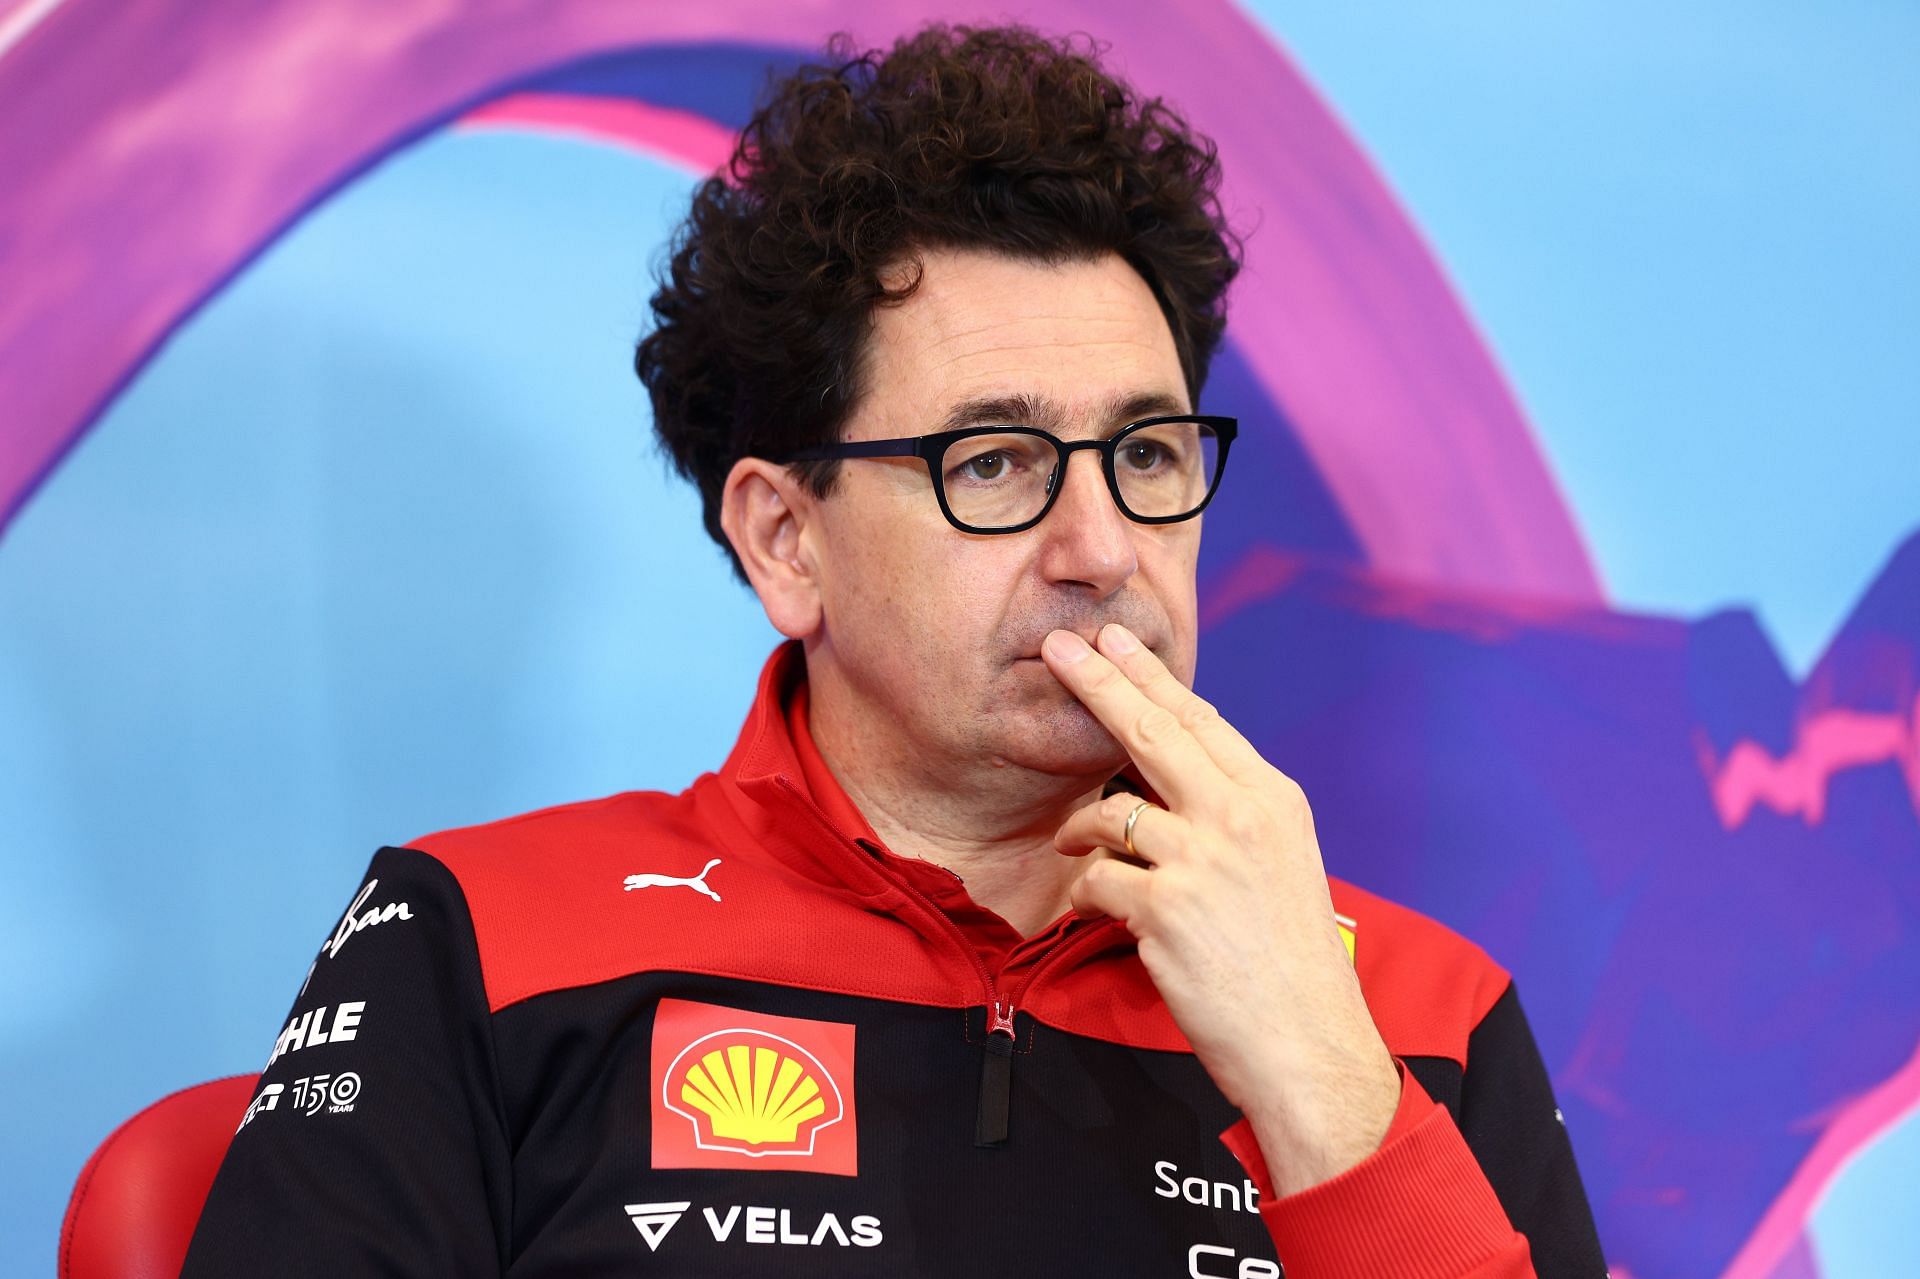 Mattia Binotto attends the Team Principals Press Conference prior to practice ahead of the 2022 Austrian GP. (Photo by Clive Rose/Getty Images)